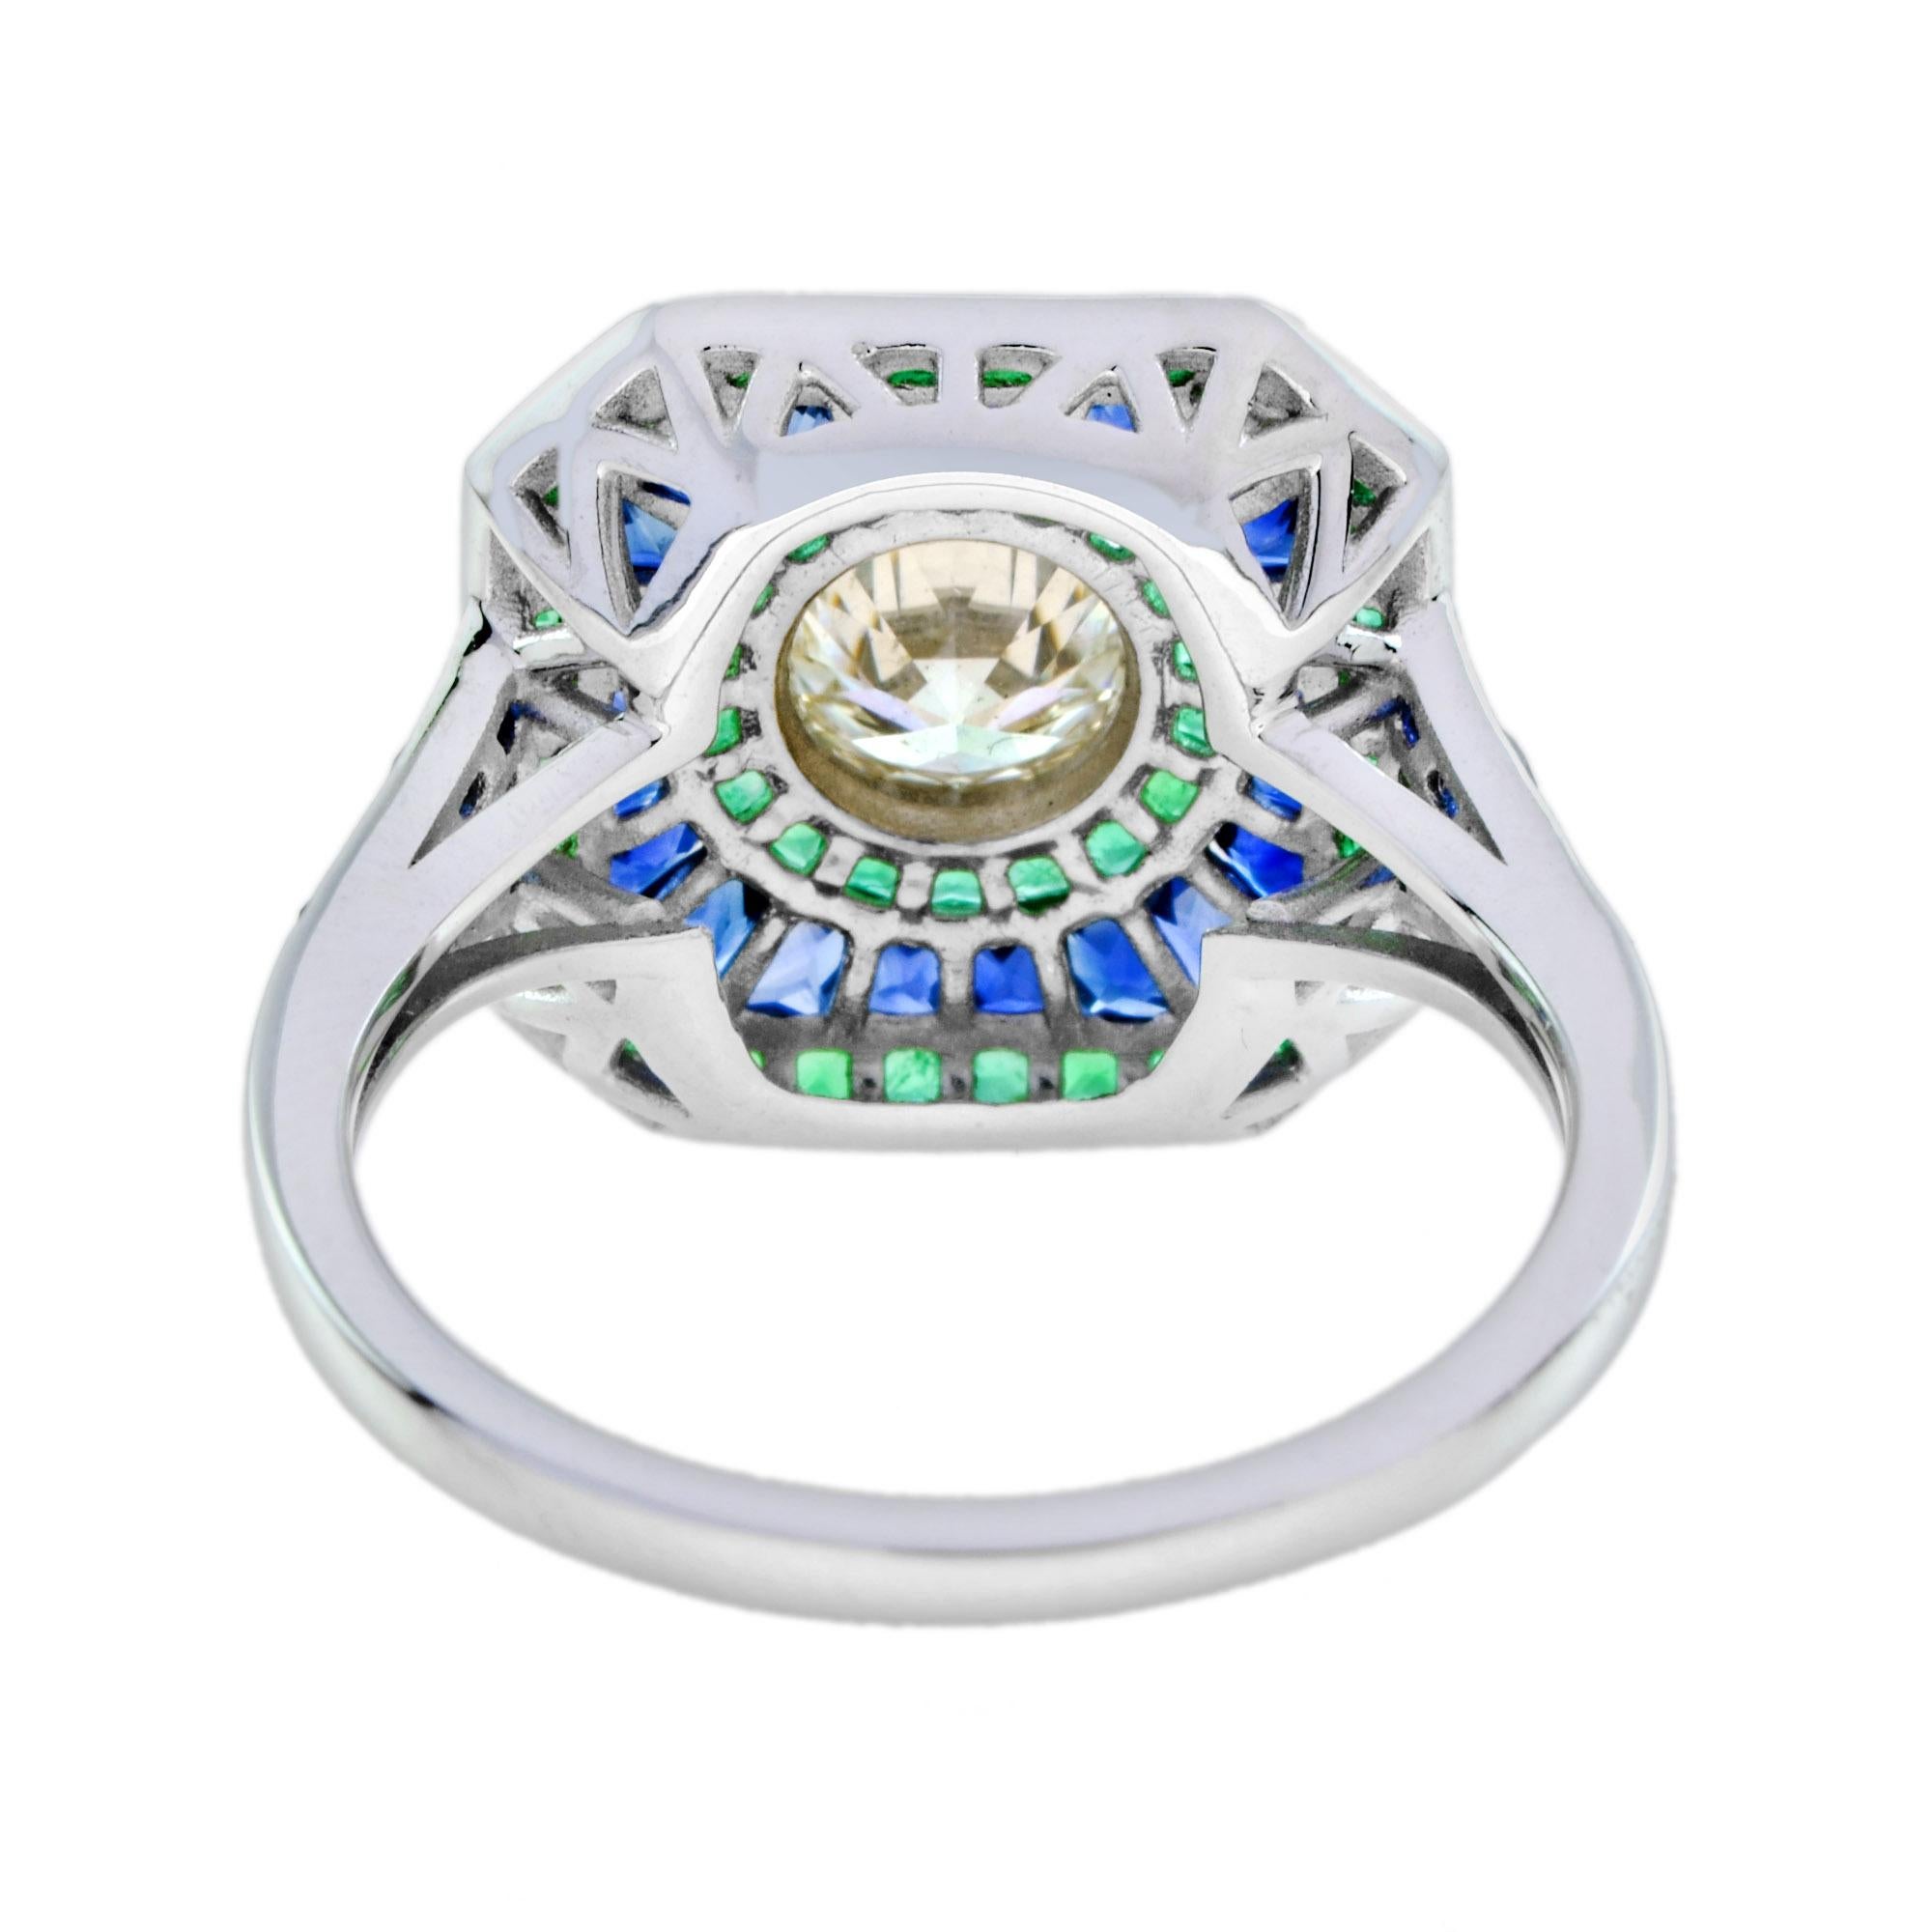 Round Cut GIA Certified Old Cut Diamond with Sapphire Emerald Engagement Ring in 18k Gold